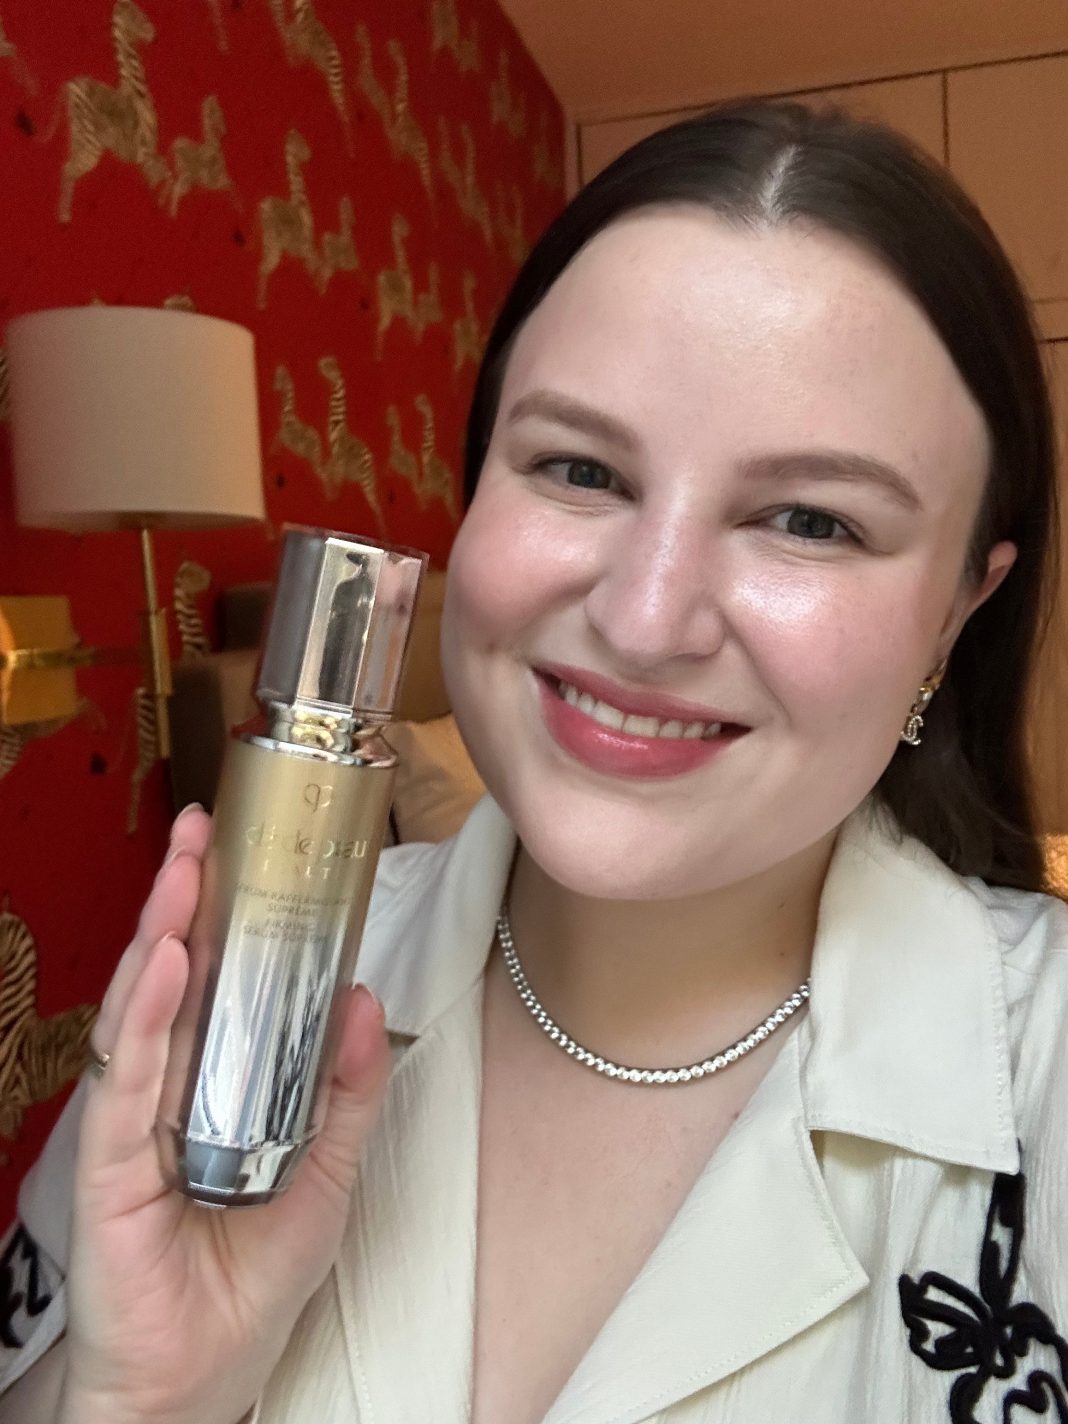 cle-de-peau-beaute-firming-serum-supreme-is-the-most-expensive-product-in-my-routine-—-review